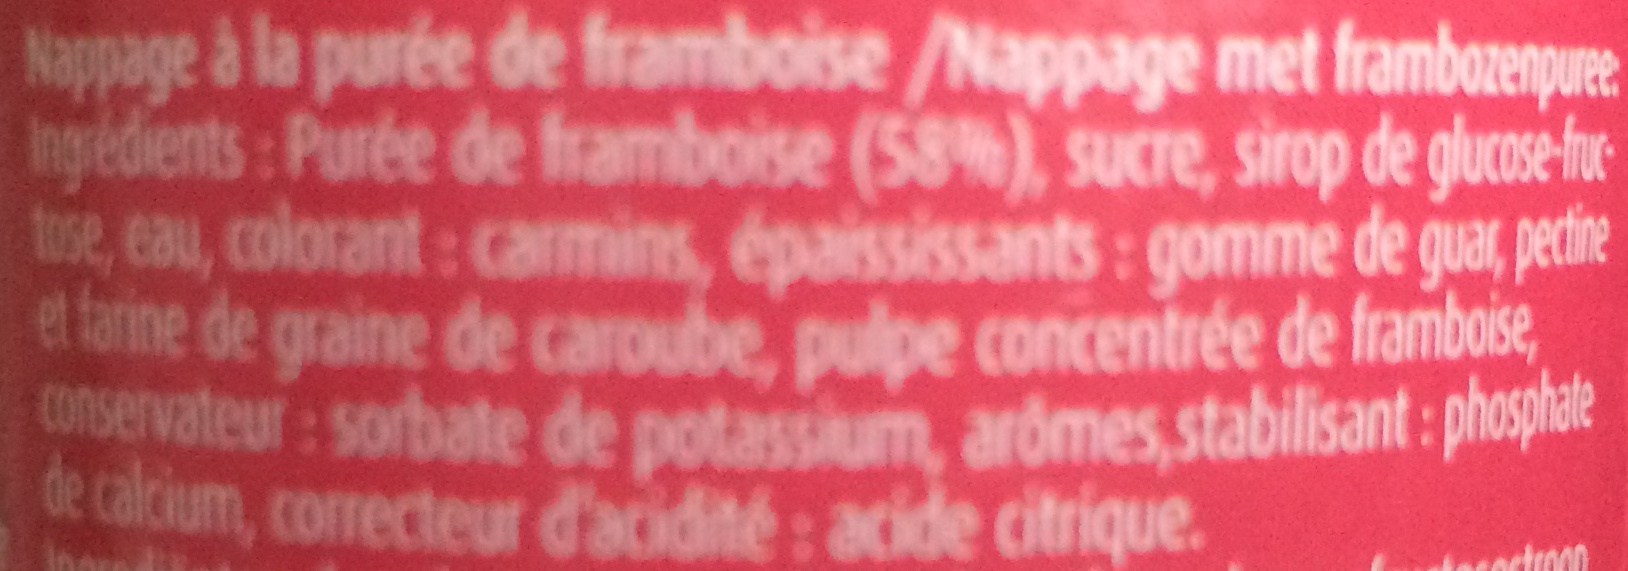 Nappage Framboise - Ingrédients